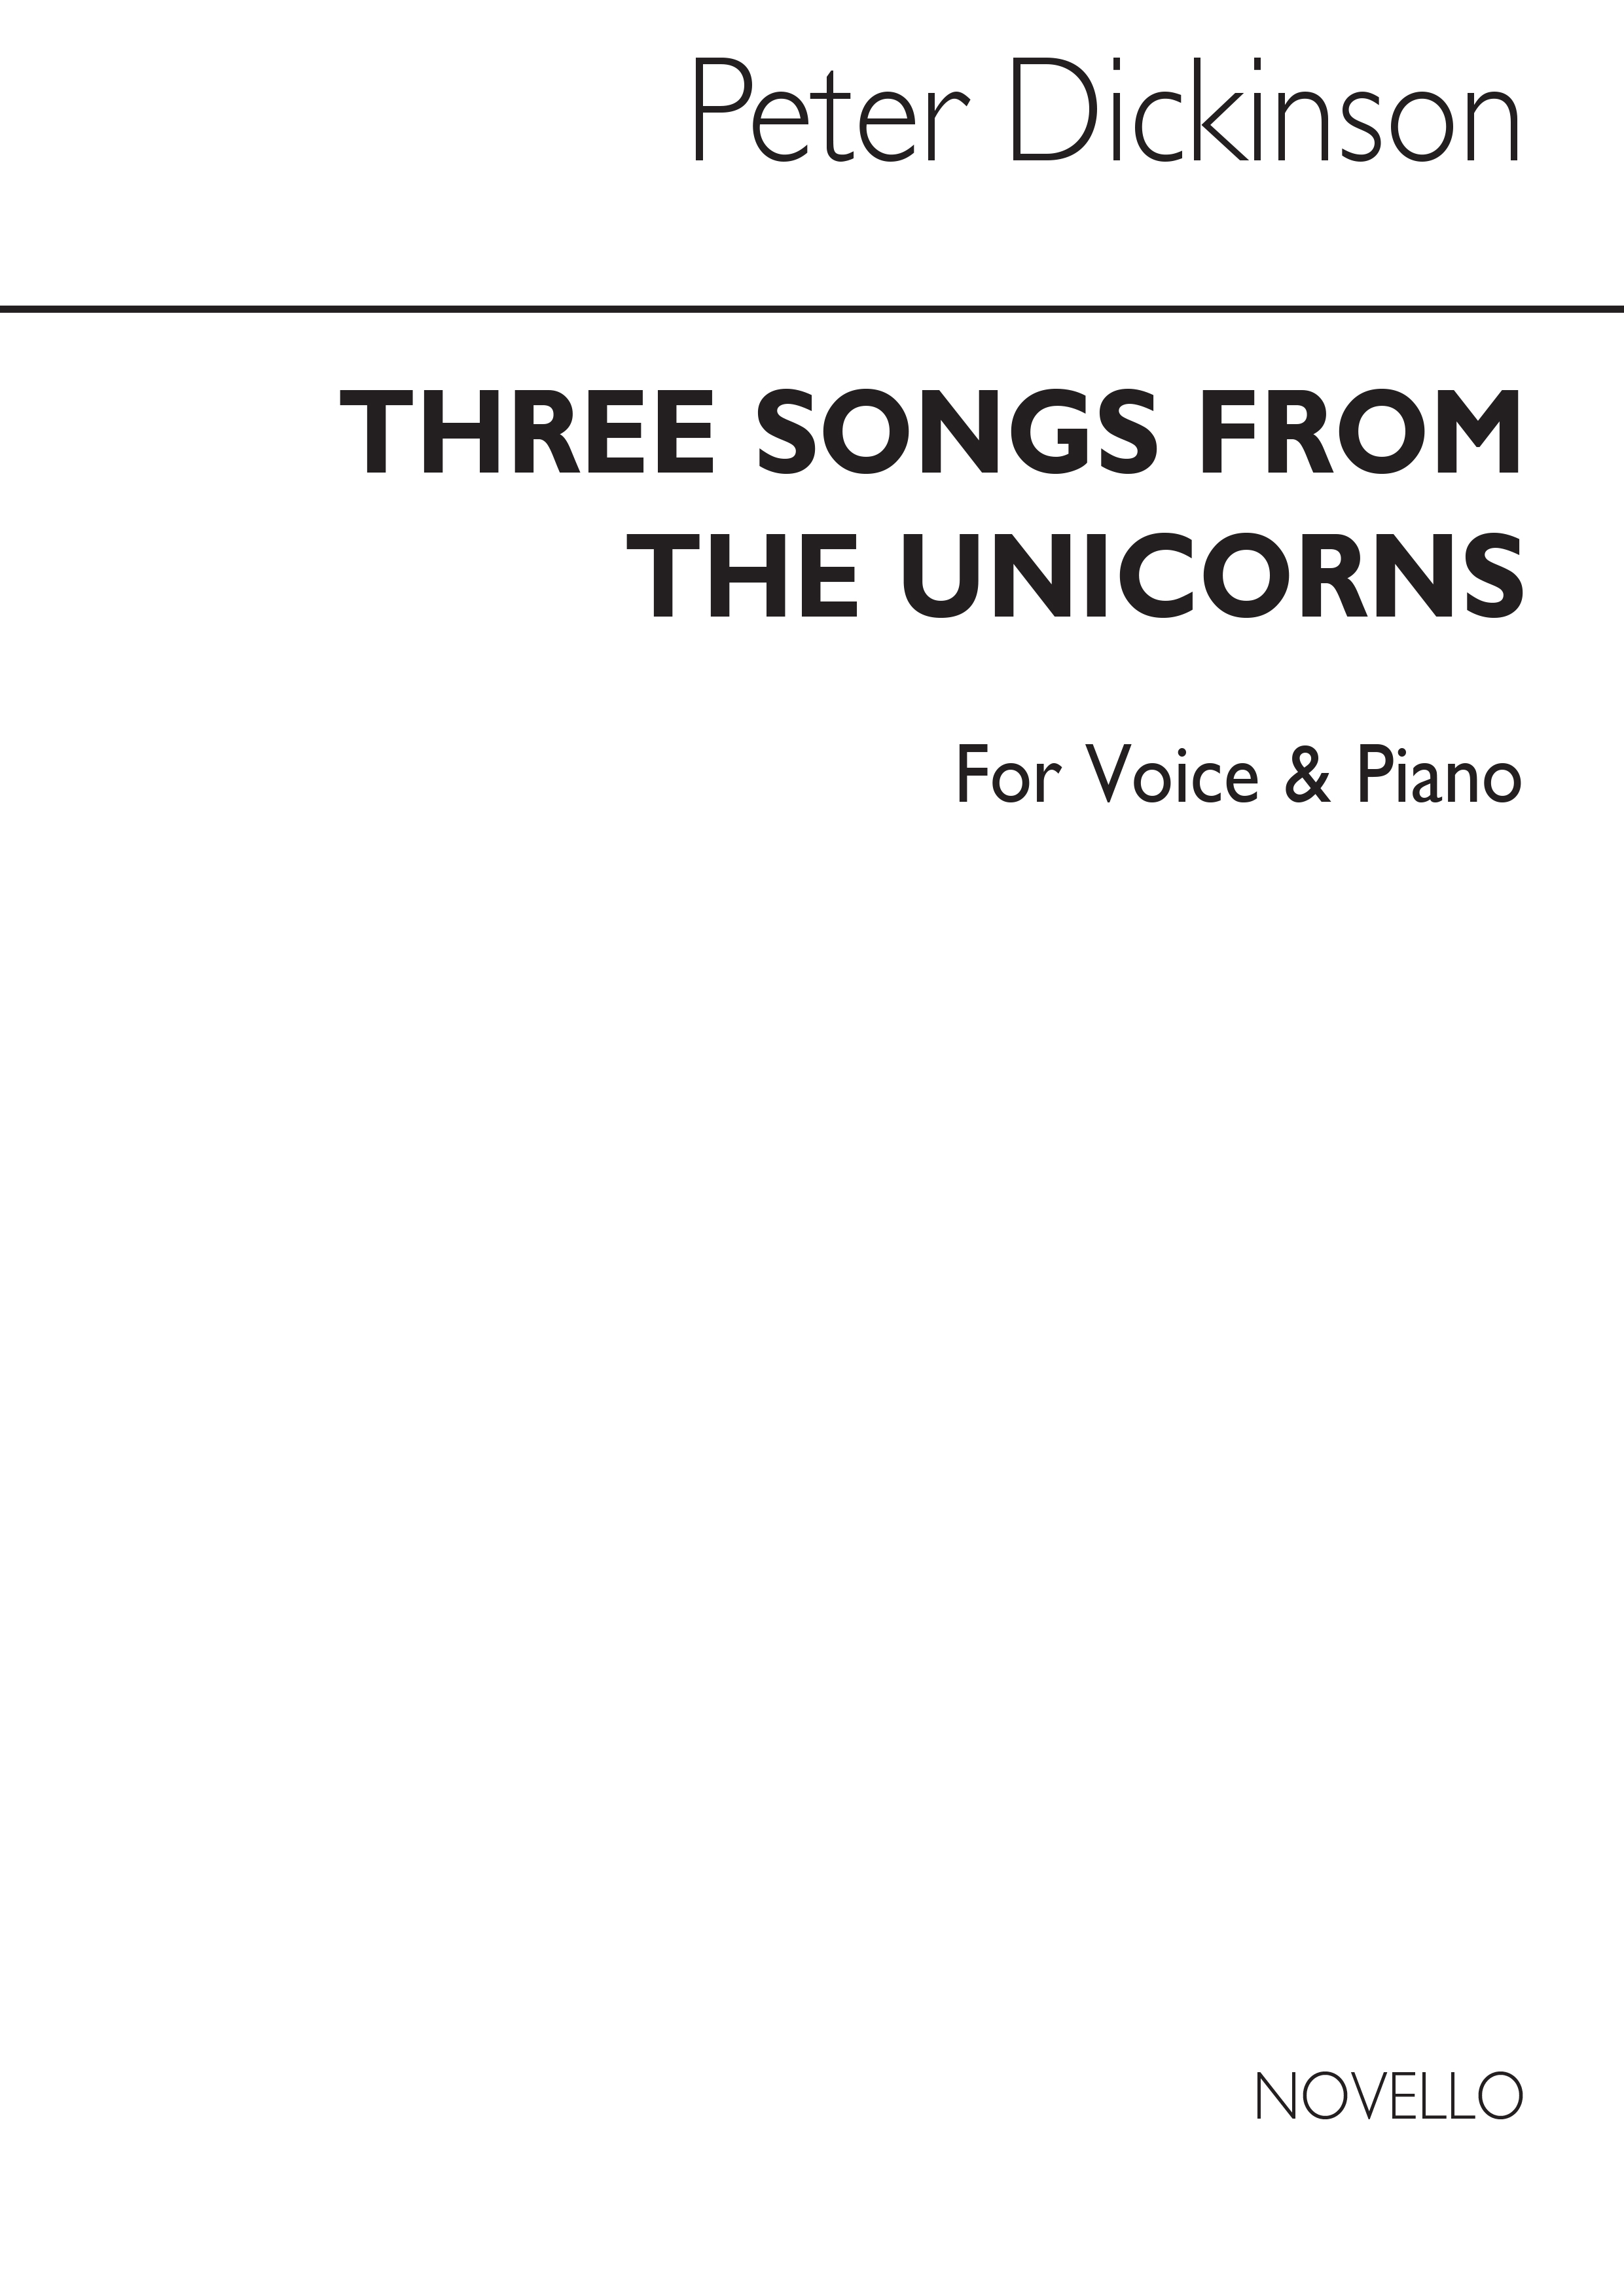 Dickinson: Three Songs From The Unicorns for Soprano and Piano